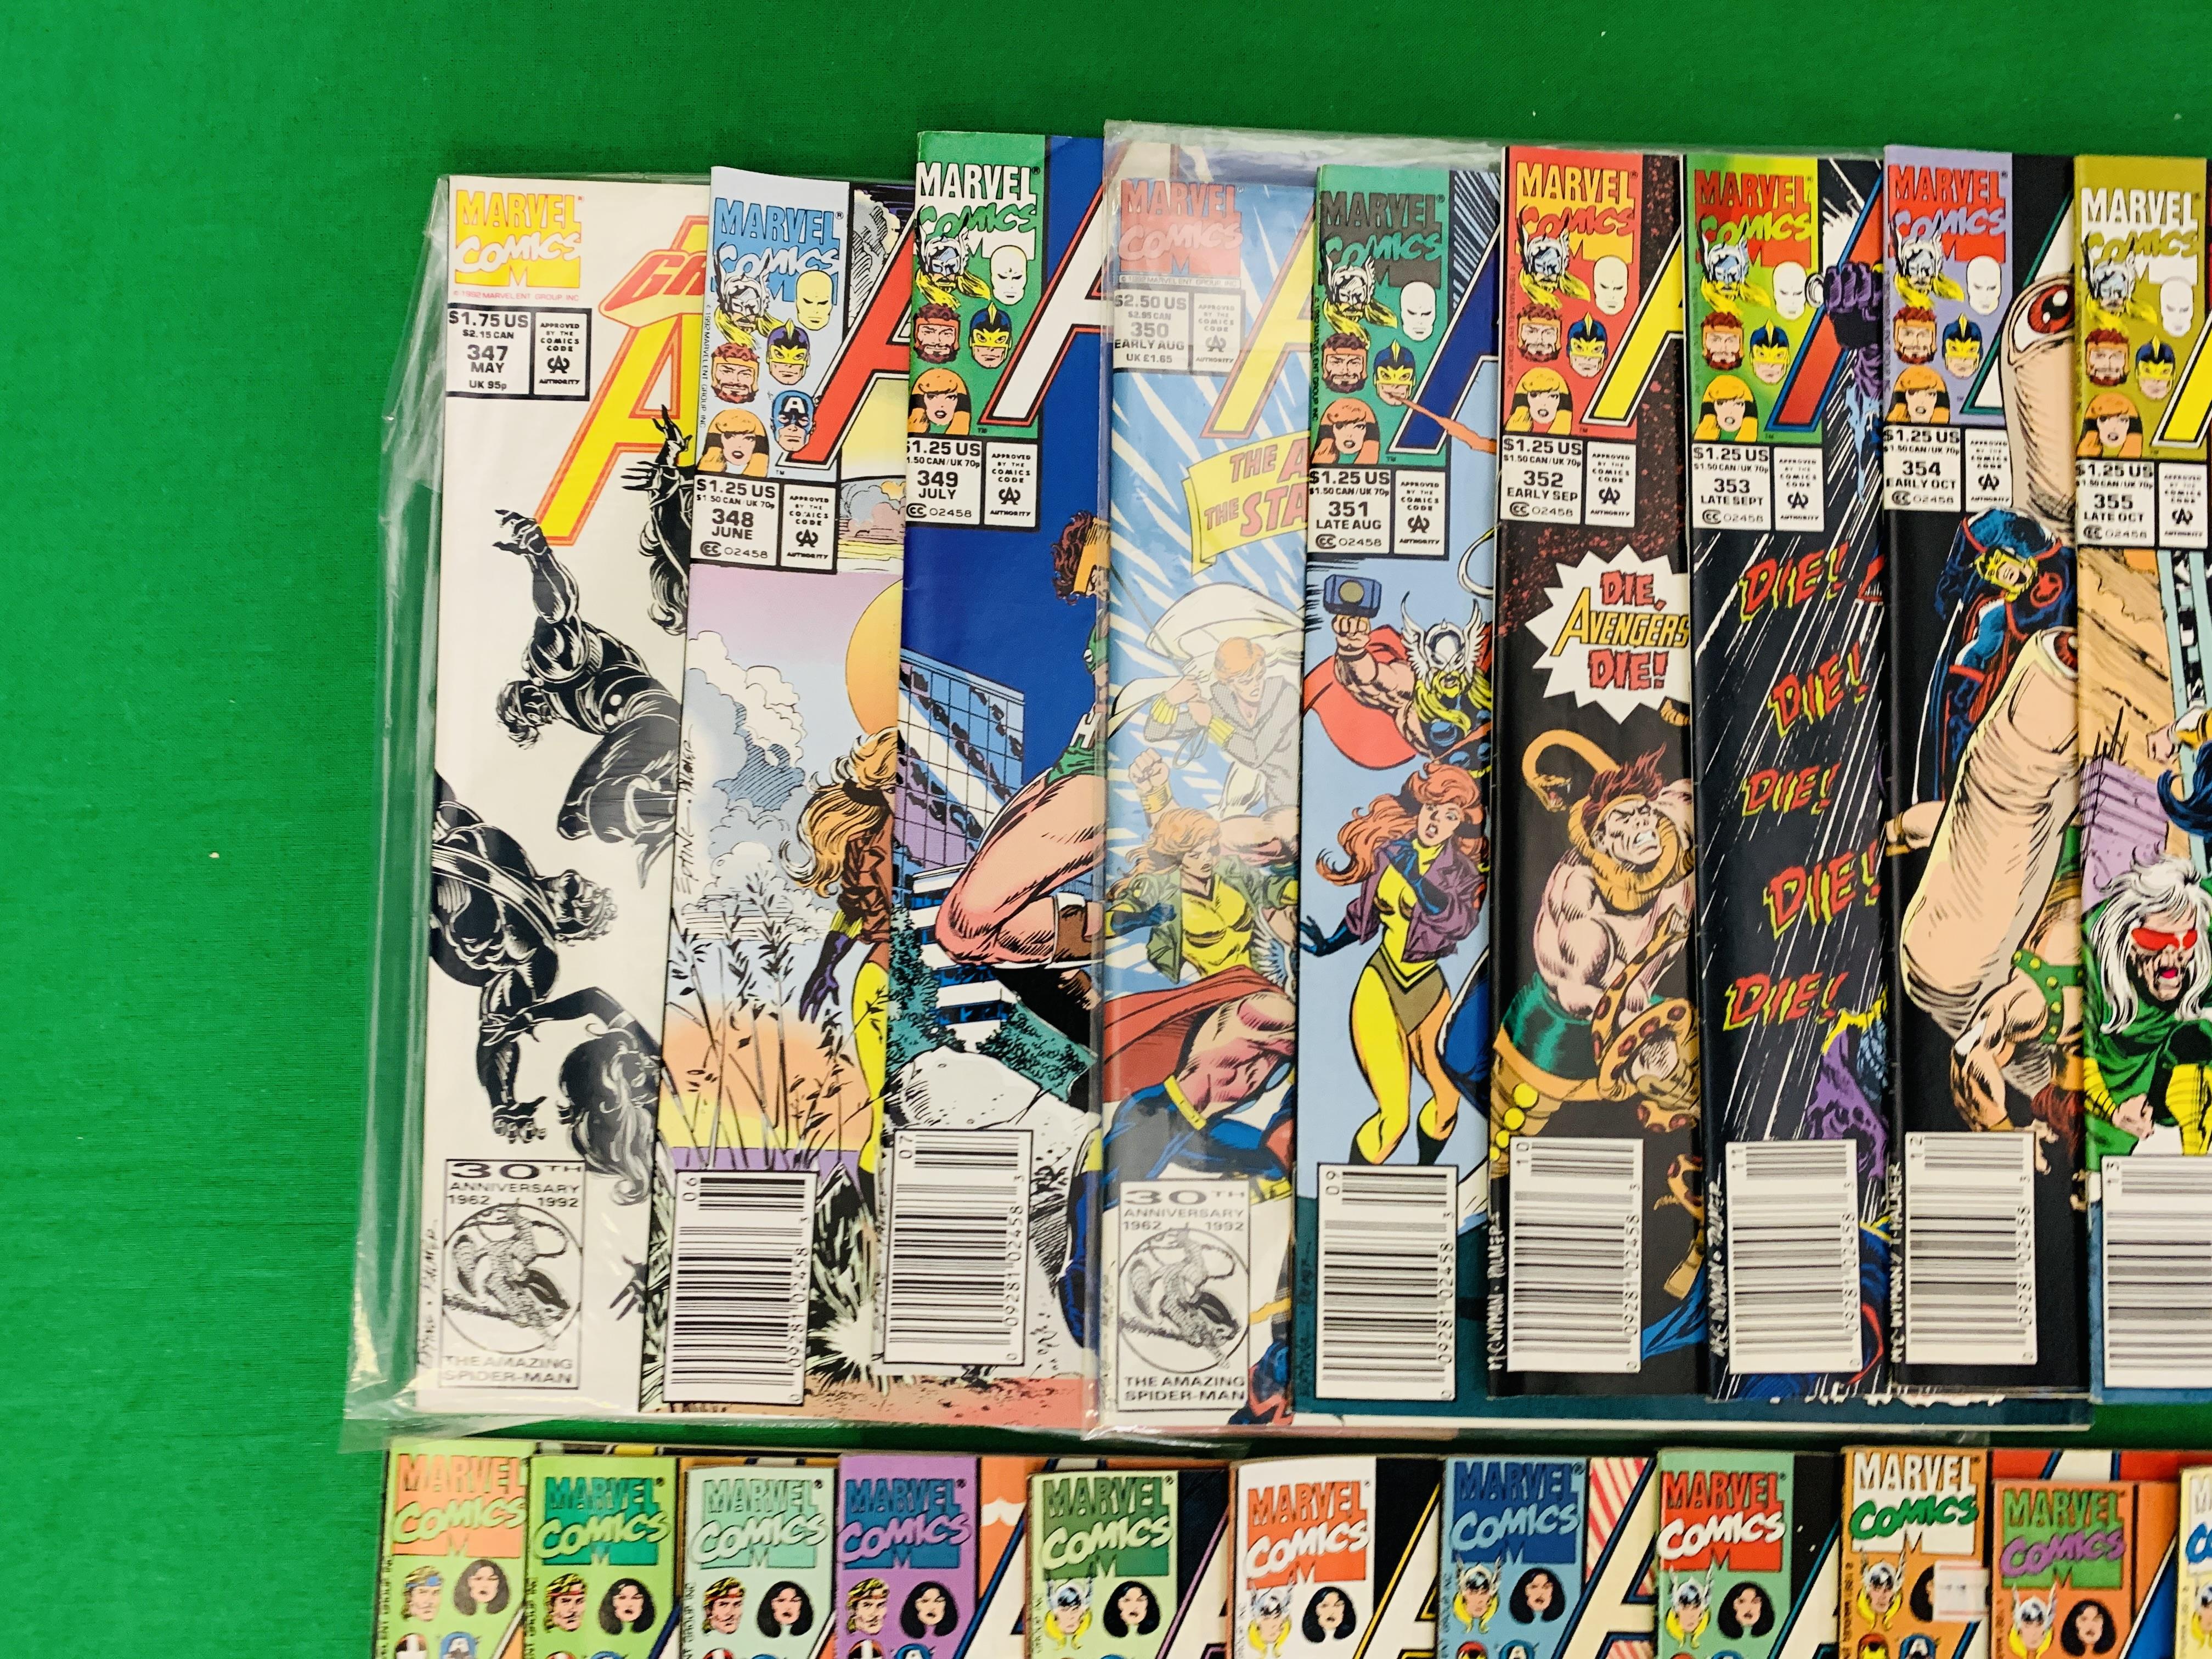 MARVEL COMICS THE AVENGERS NO. 300 - 402, MISSING ISSUES 325, 329 AND 334. - Image 8 of 16